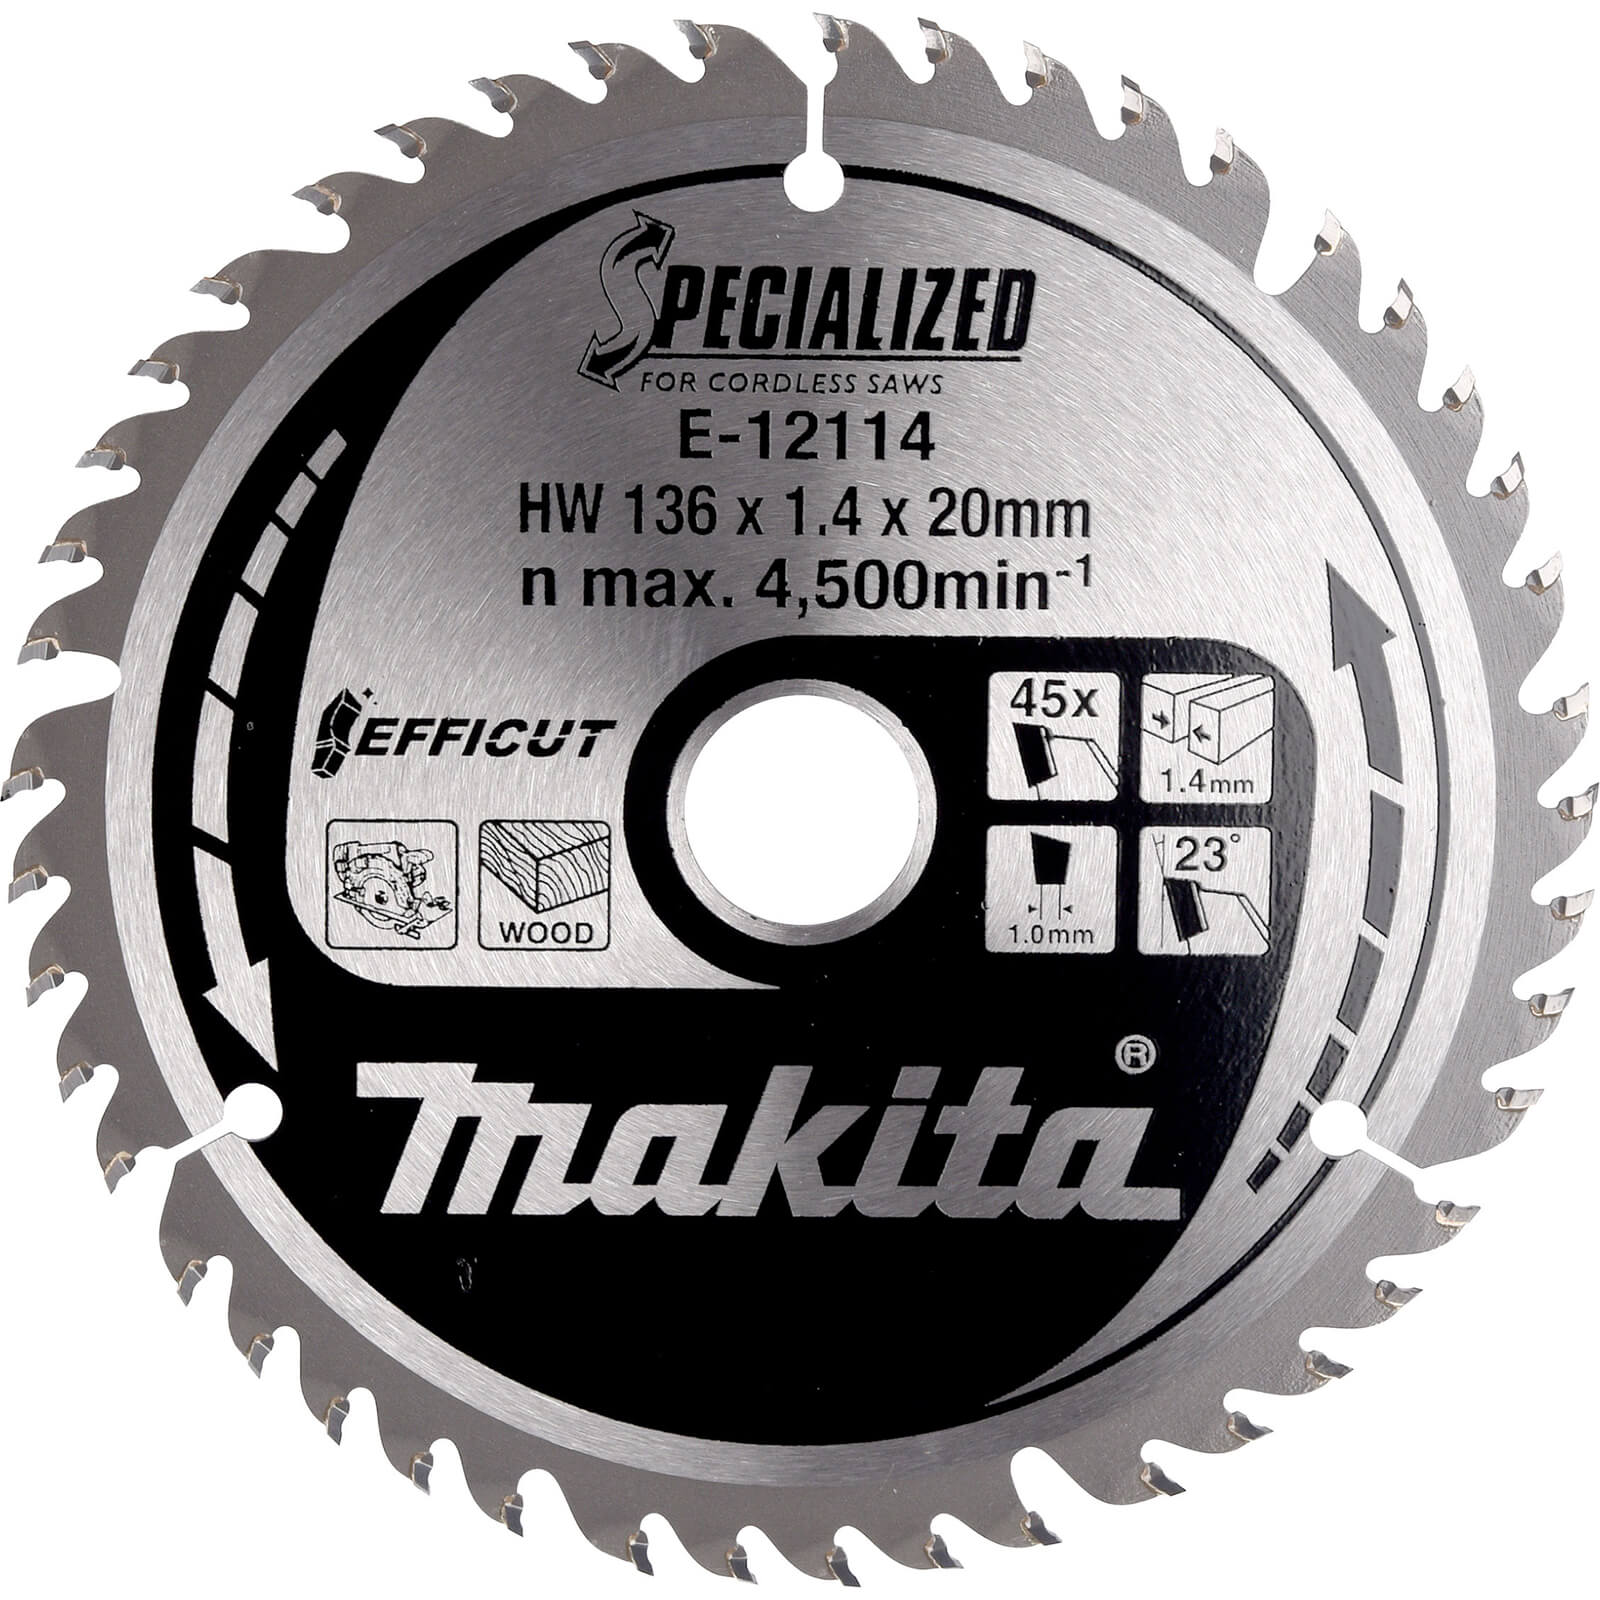 Image of Makita SPECIALIZED Efficut Wood Cutting Saw Blade 136mm 45T 20mm